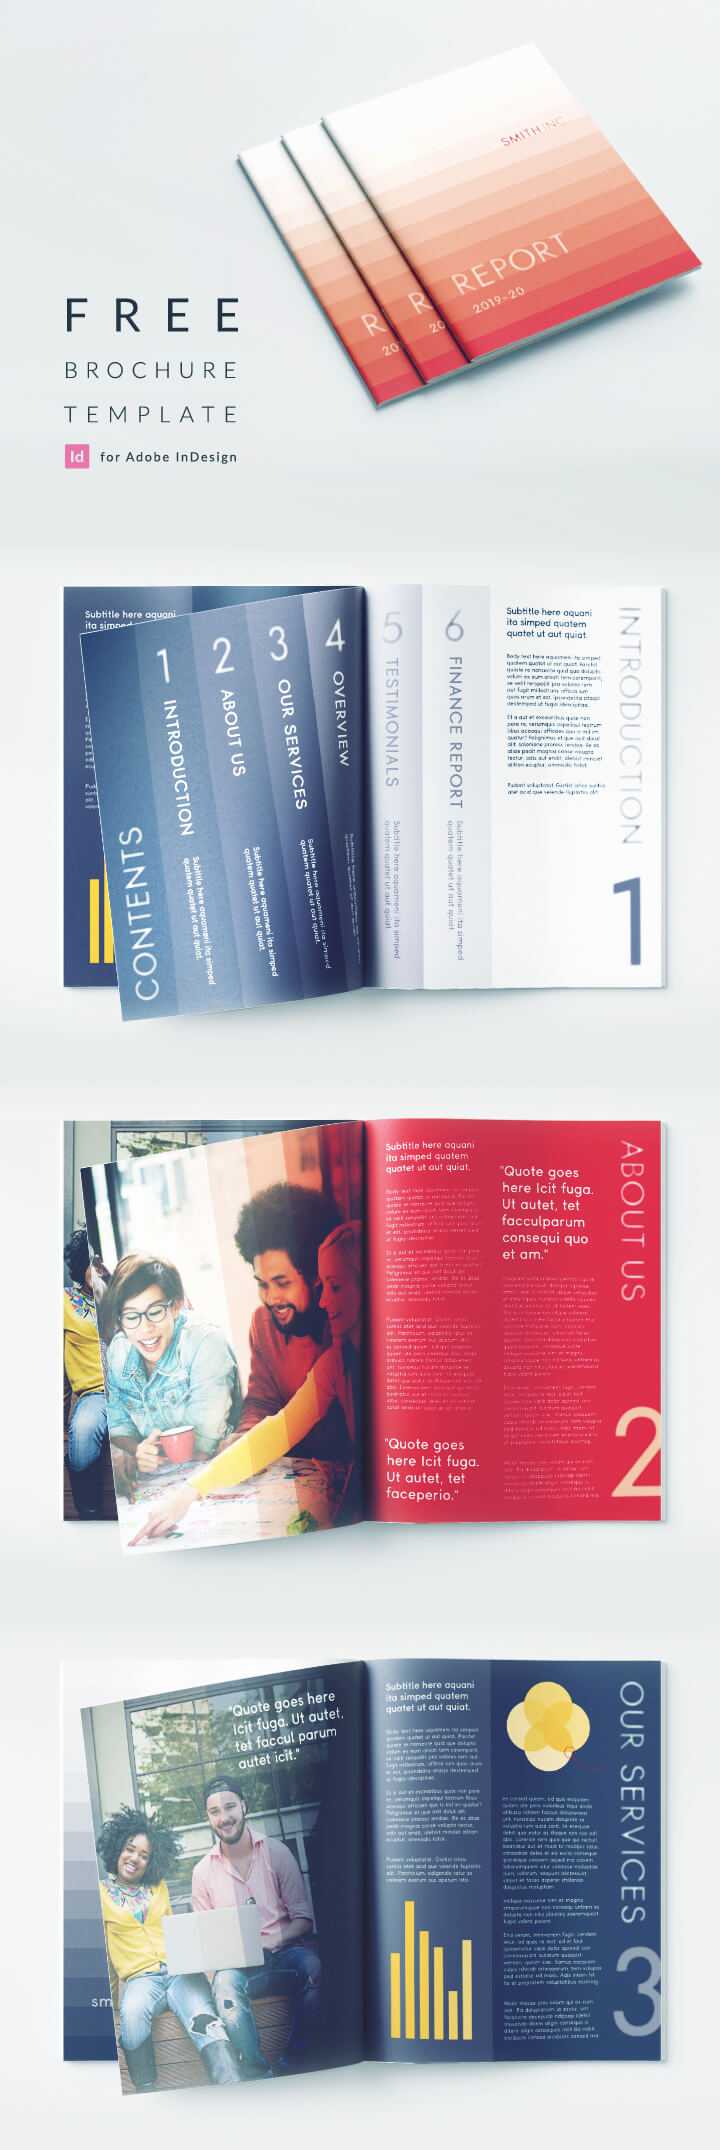 Elegant Corporate Brochure Or Report Indesign Template With Free Annual Report Template Indesign